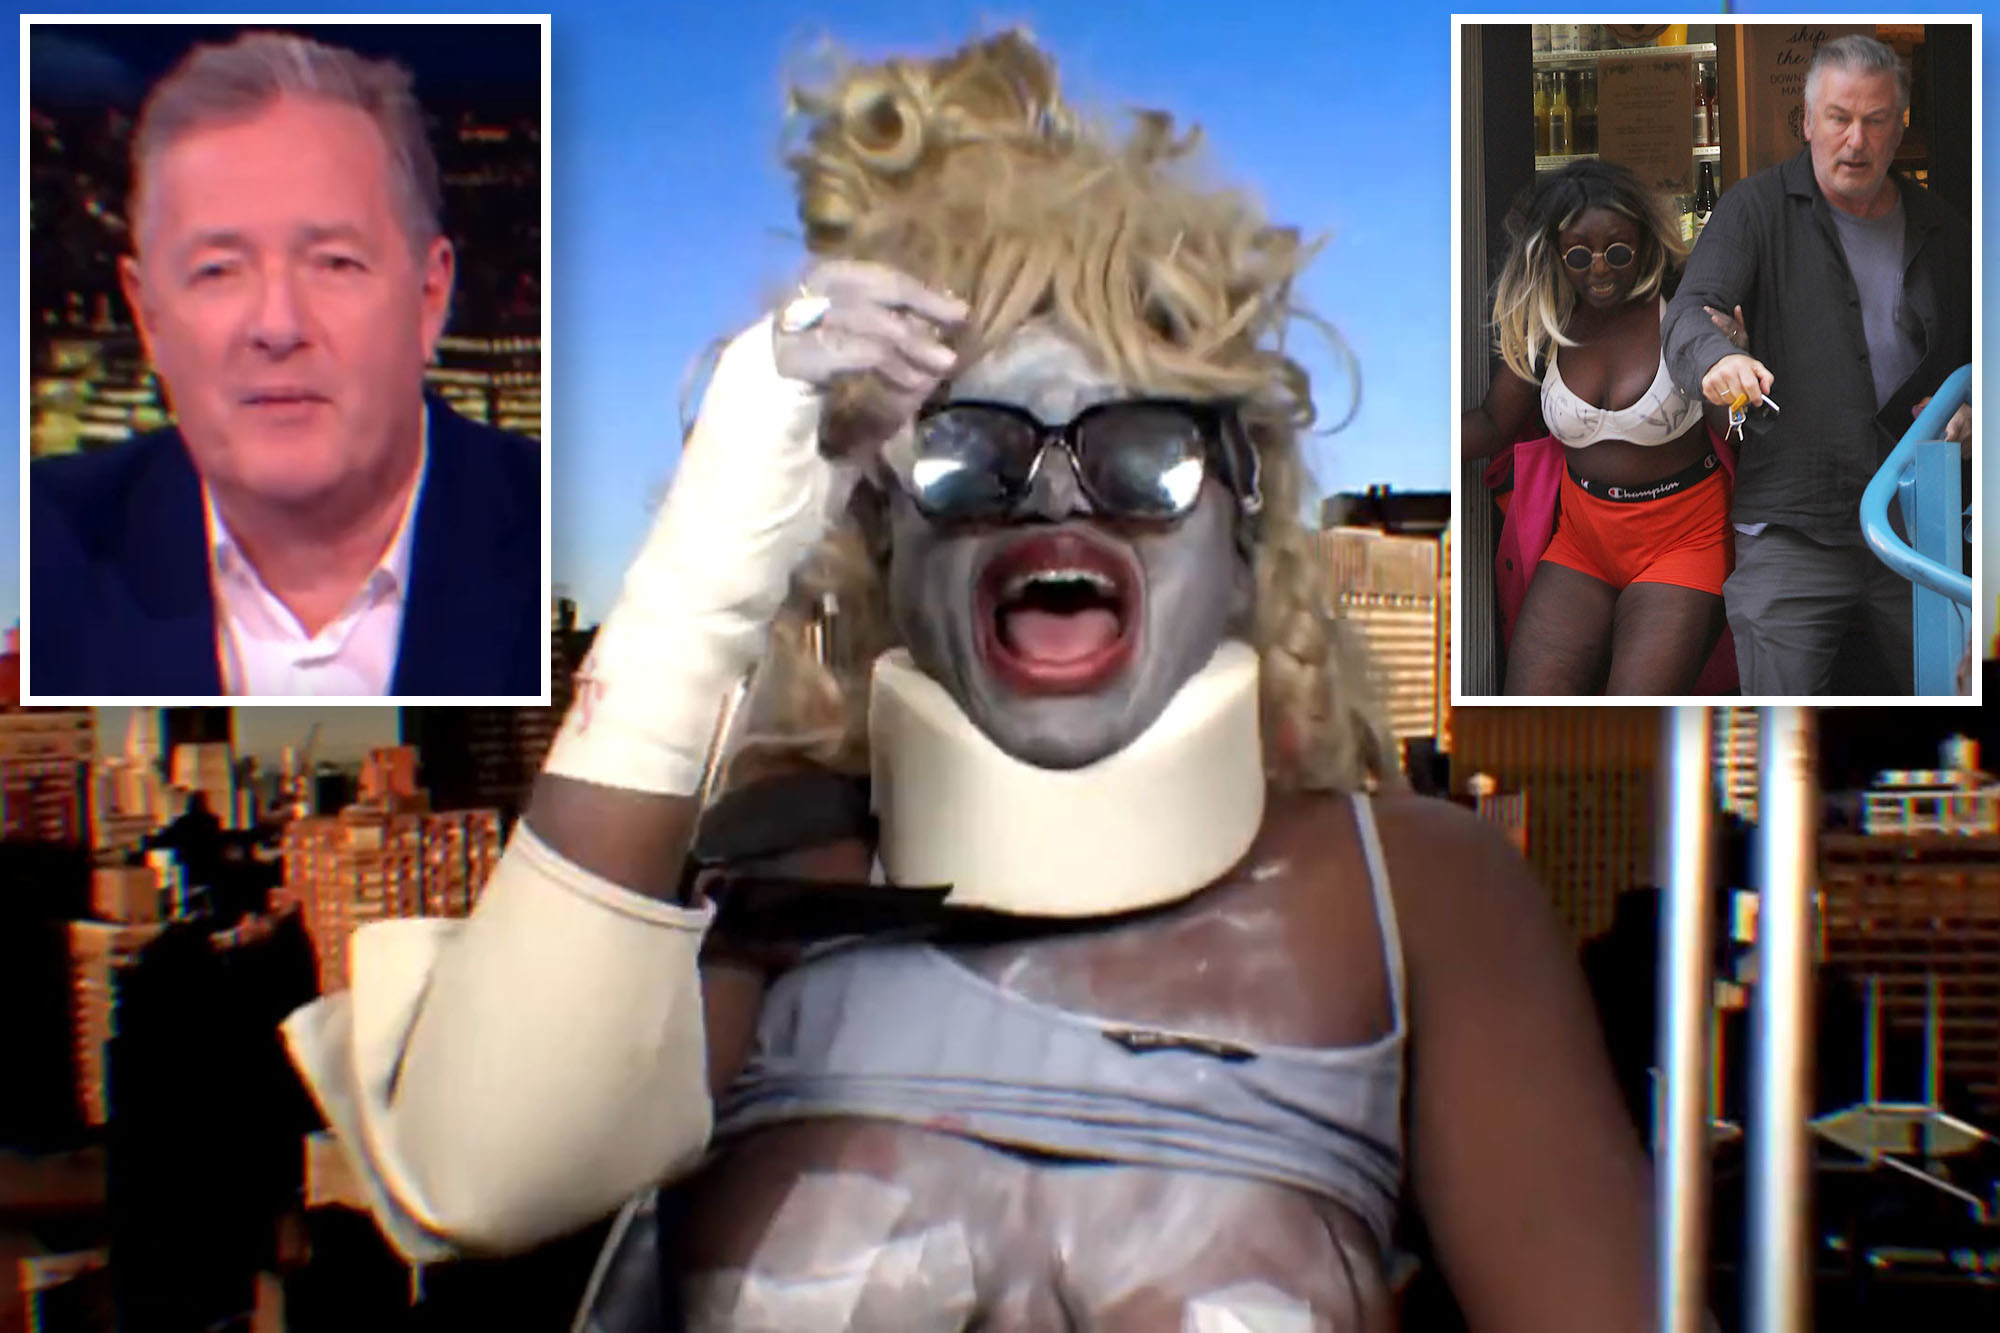 'Crackhead Barney' says she was 'maimed' by Alec Baldwin during coffee shop incident as she dons diaper, bares chest in surreal Piers Morgan interview